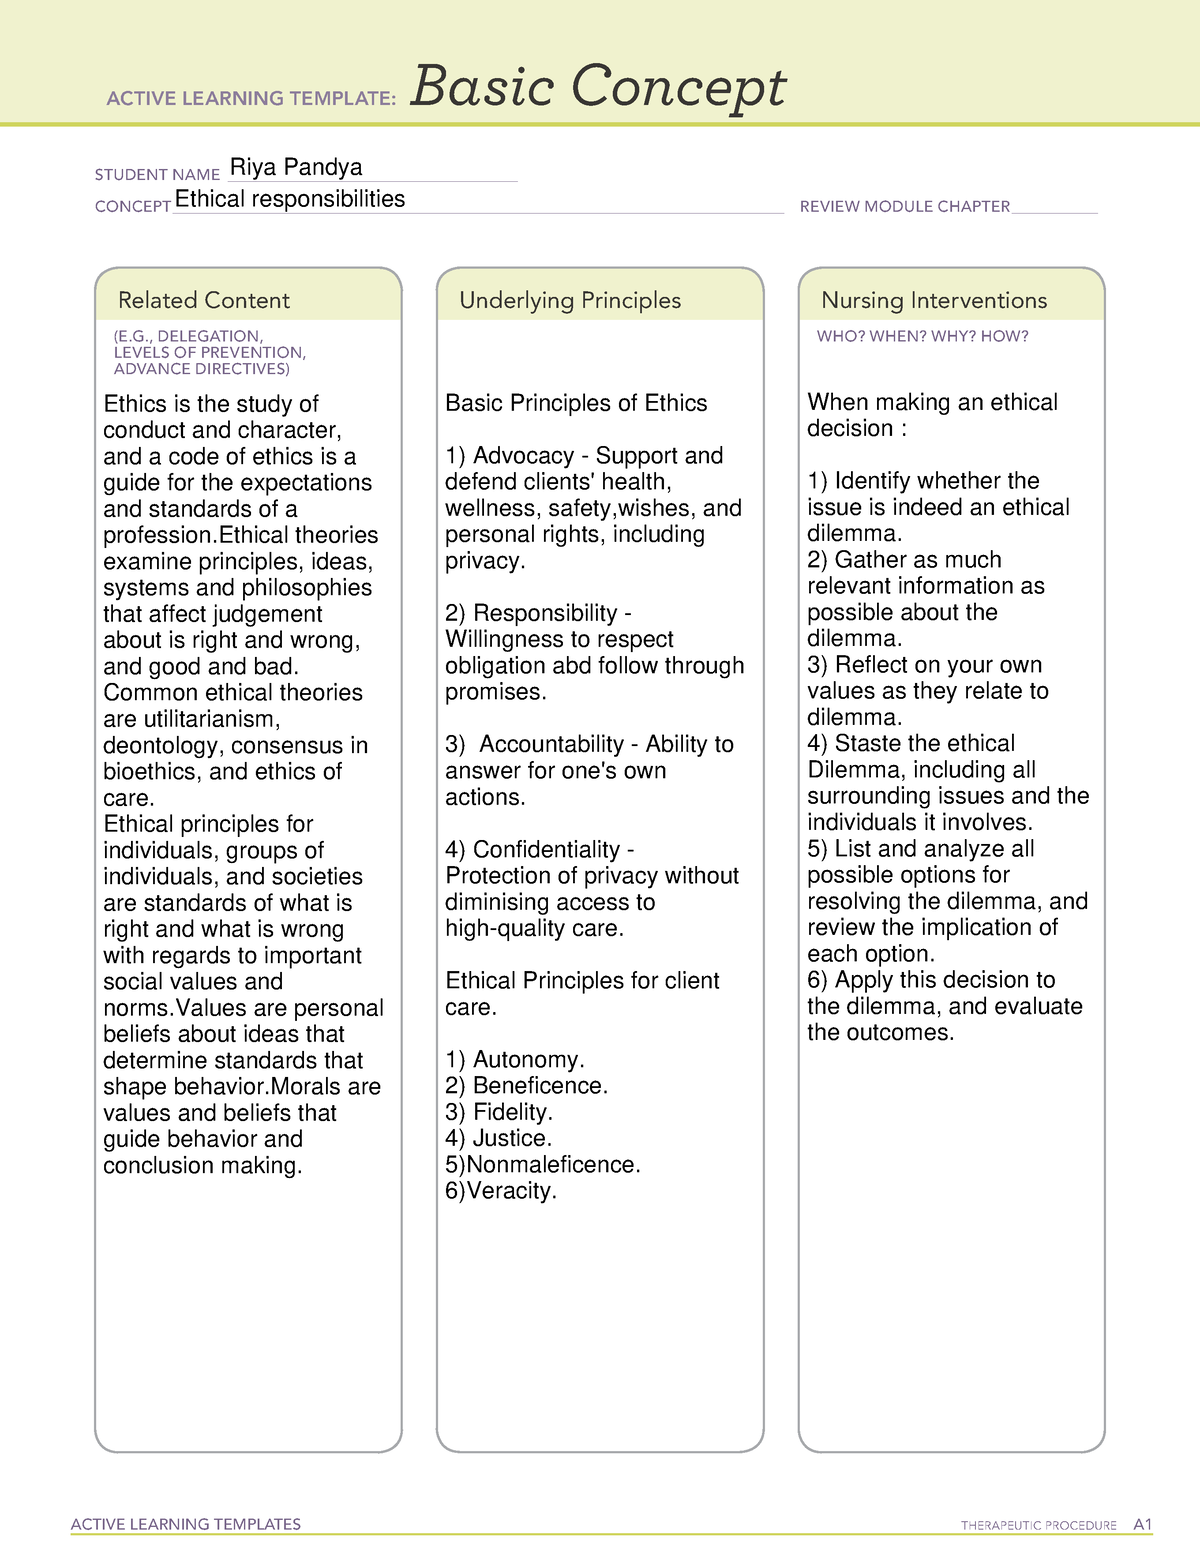 Ethical Responsibilities ACTIVE LEARNING TEMPLATES THERAPEUTIC